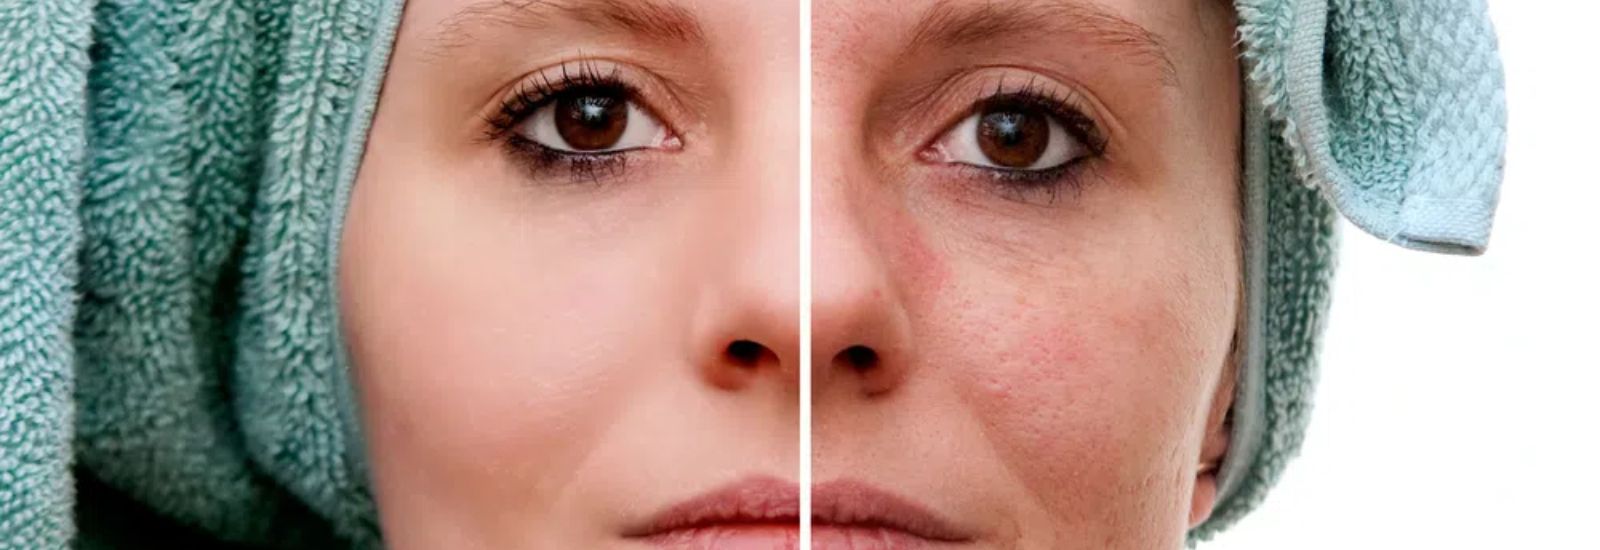 Woman after acne treatment